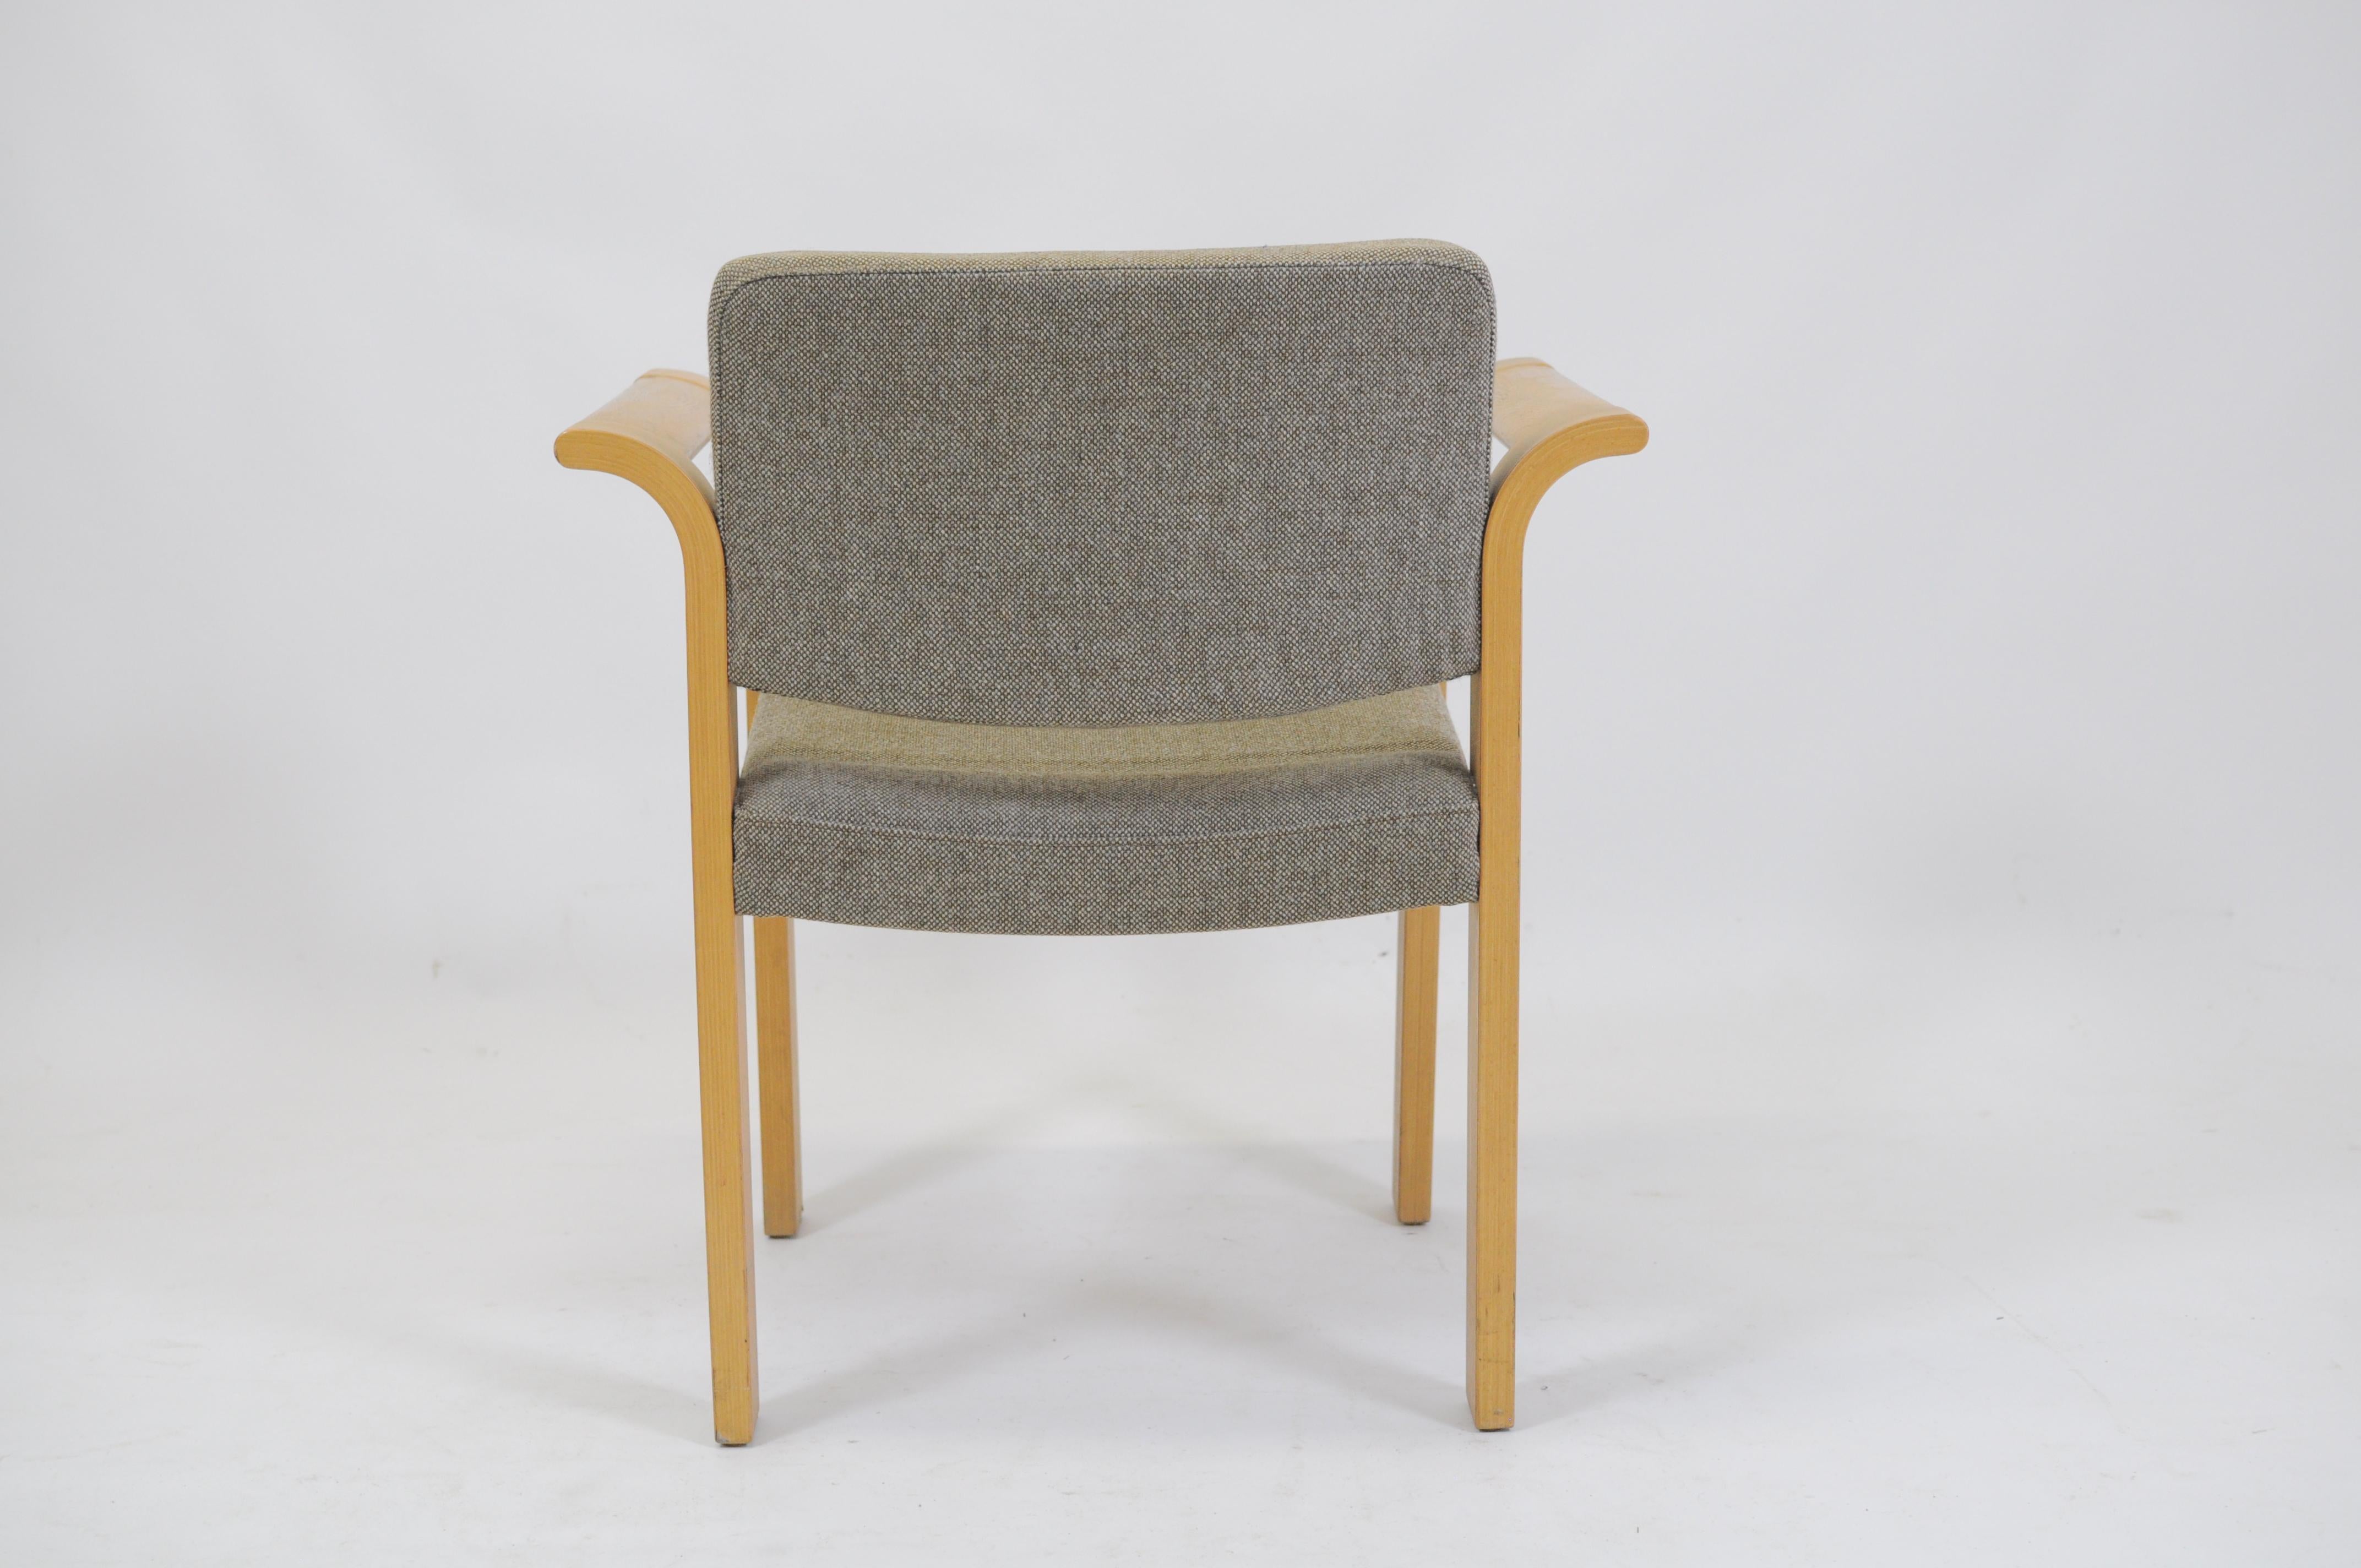 1970s Rud Thygesen, Johnny Sorensen Set of Eight Armchairs - Inc. Reupholstery In Good Condition For Sale In Knebel, DK